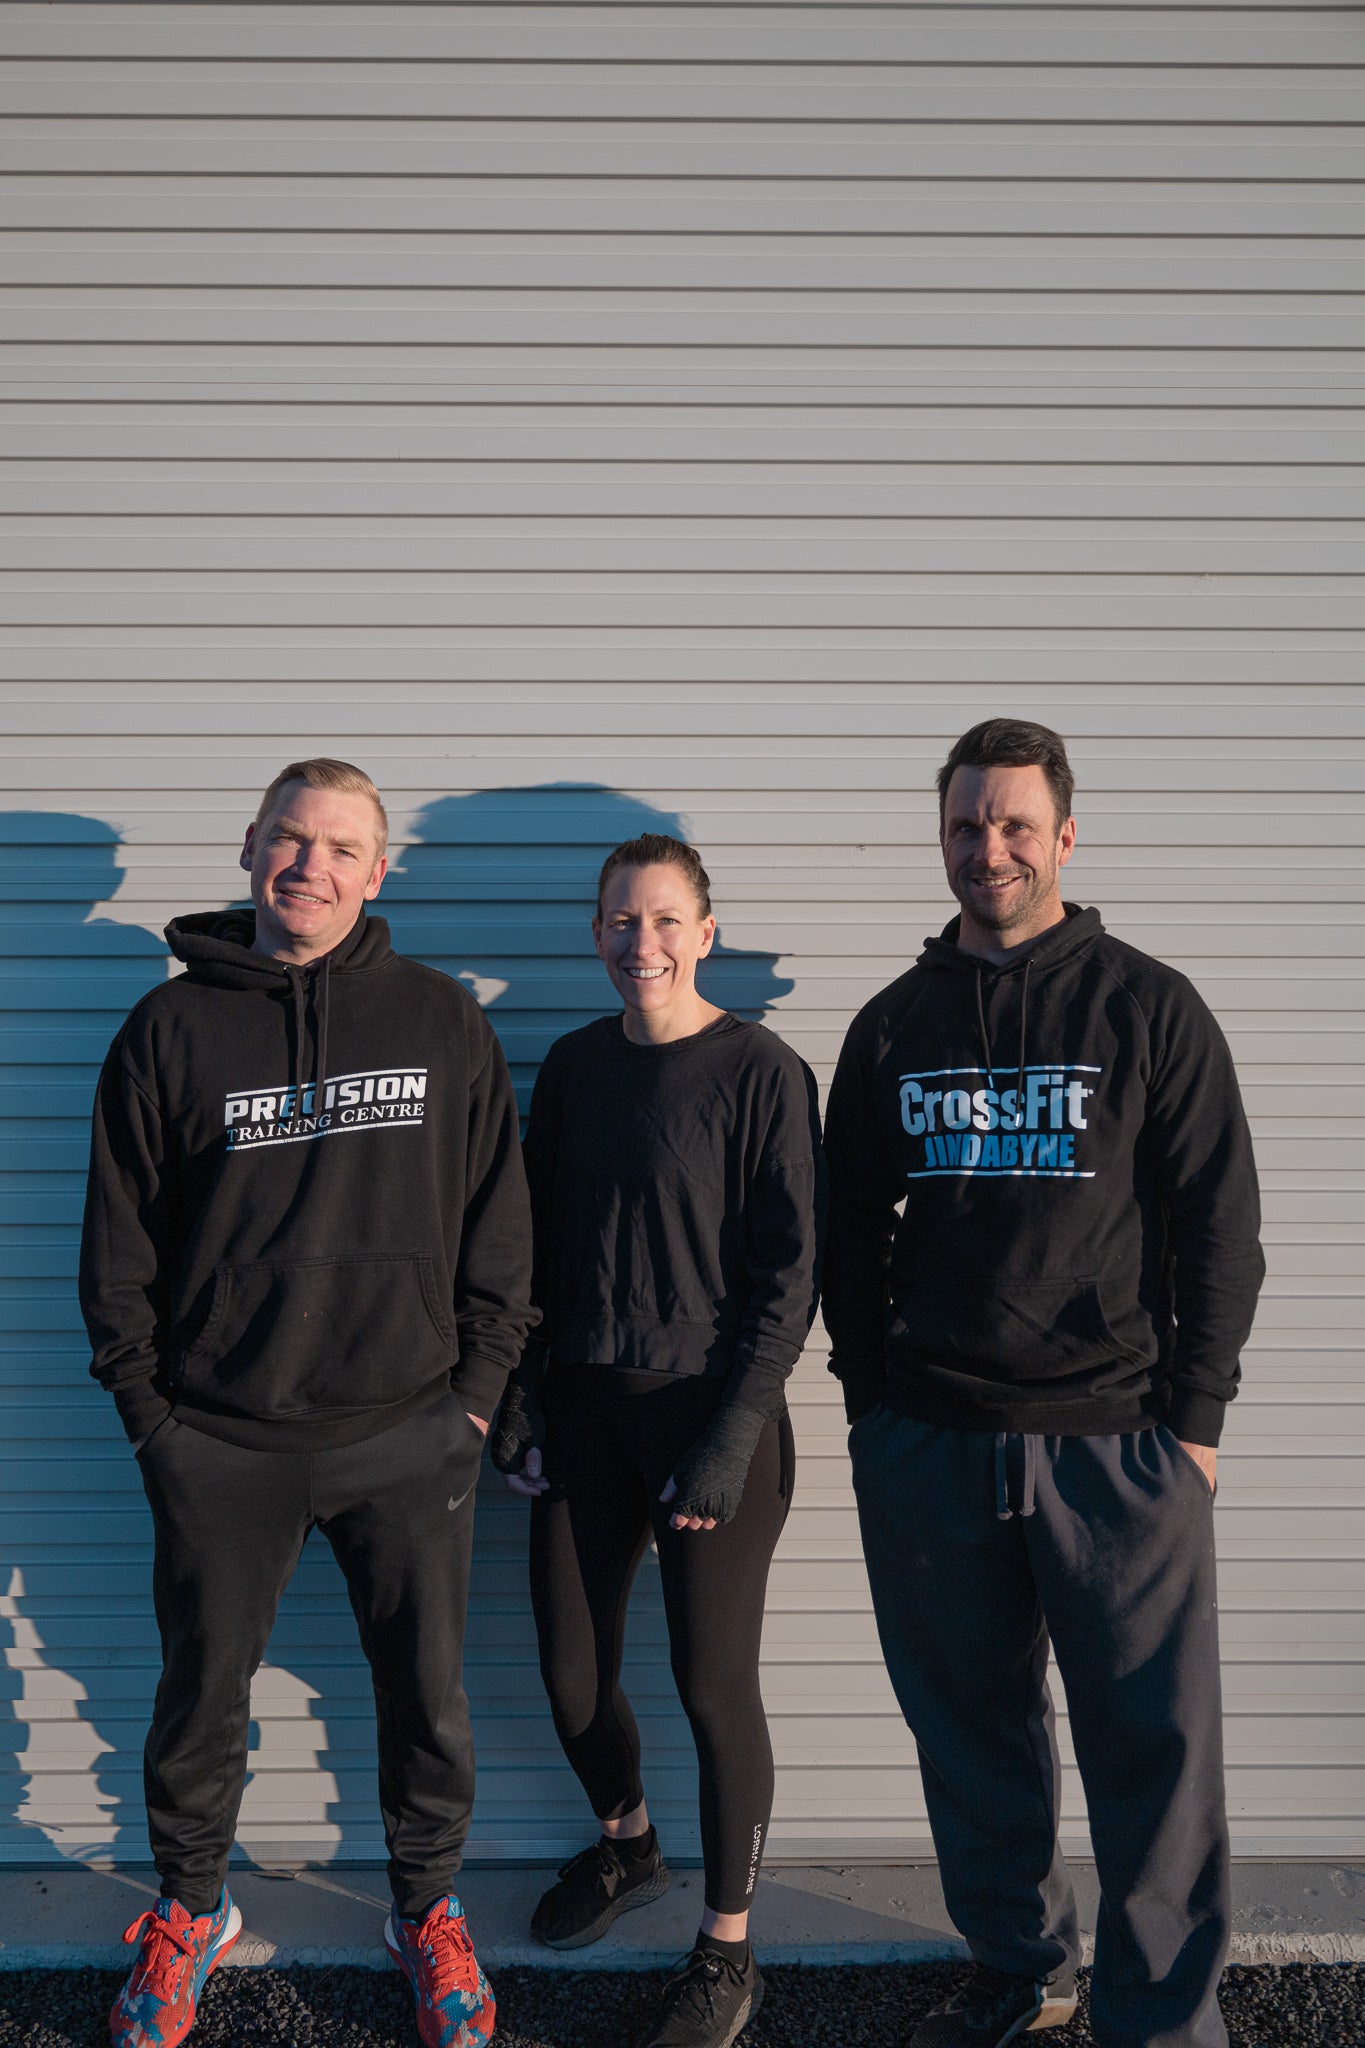 Jindabyne Crossfit Coaches and Owner of Precision Training Centre